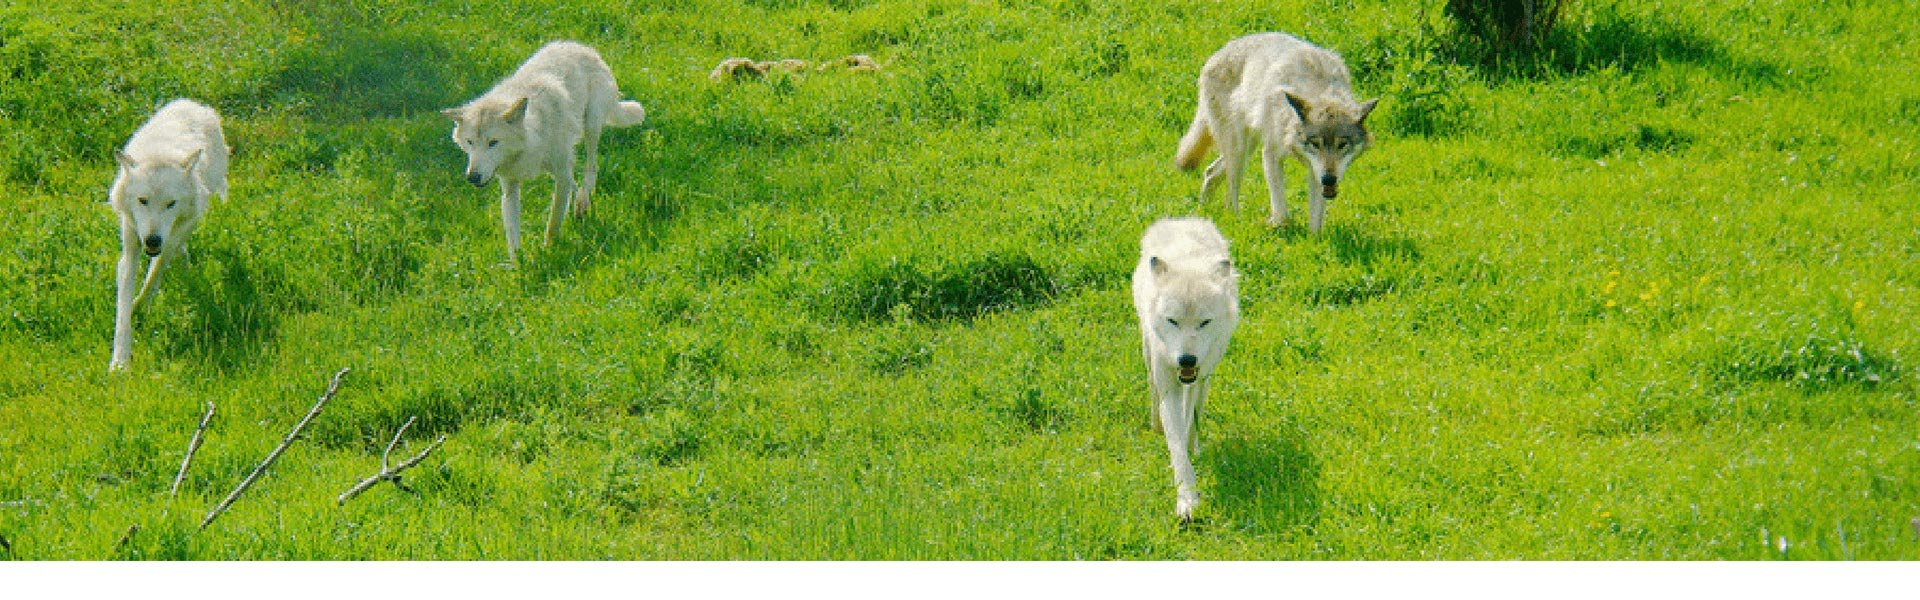 Grey Wolves walking on grass